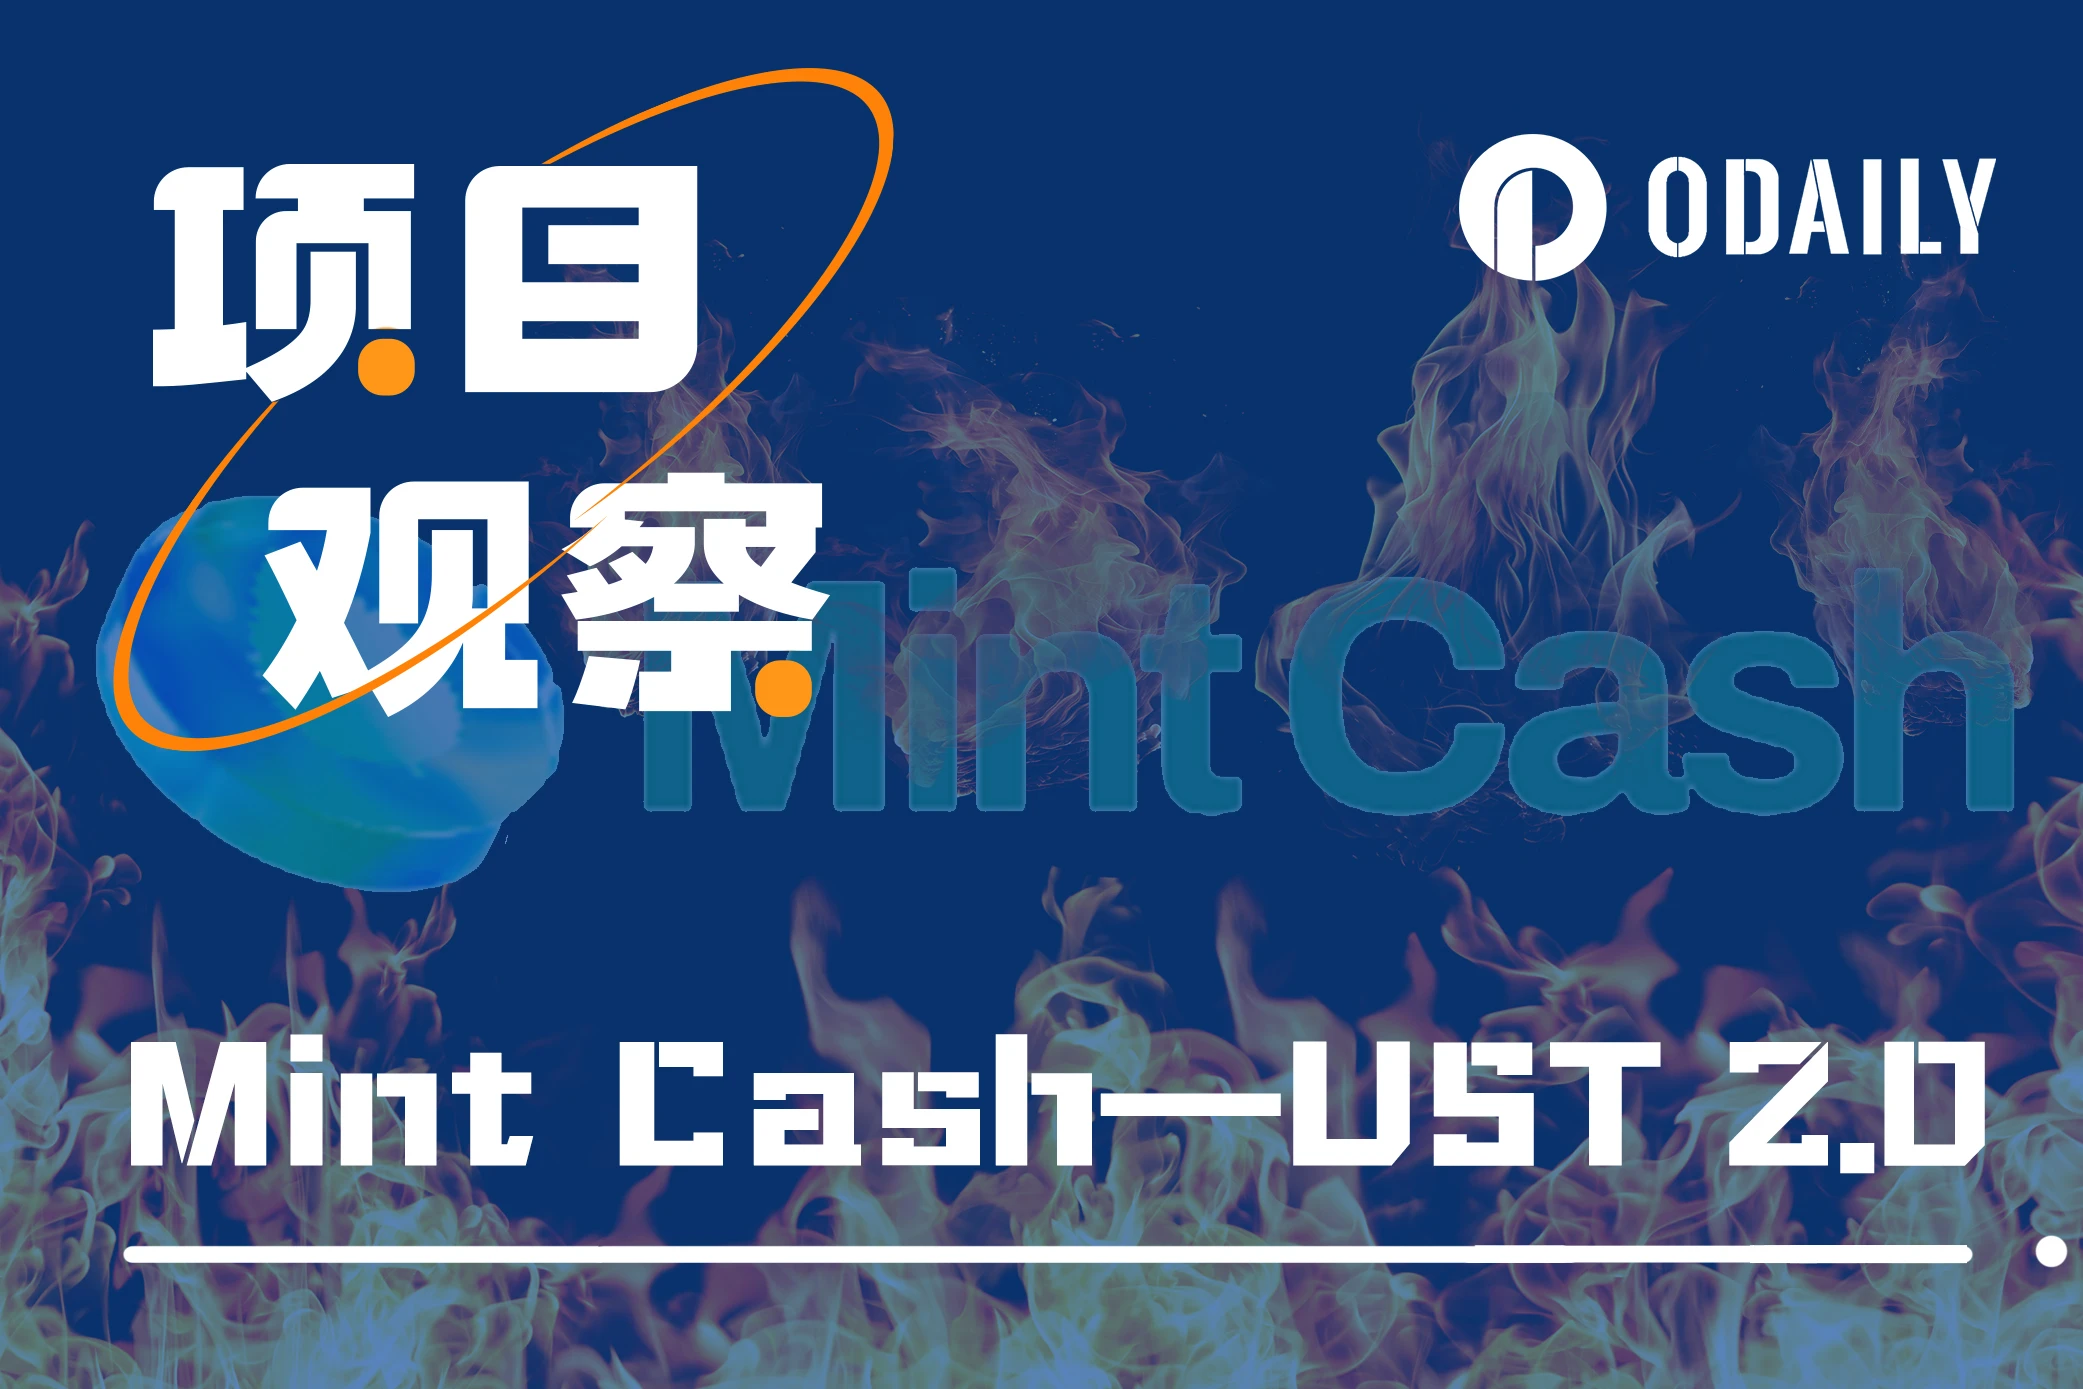 Inheriting the legacy of Terra, can Mint Cash surpass the glory of UST?